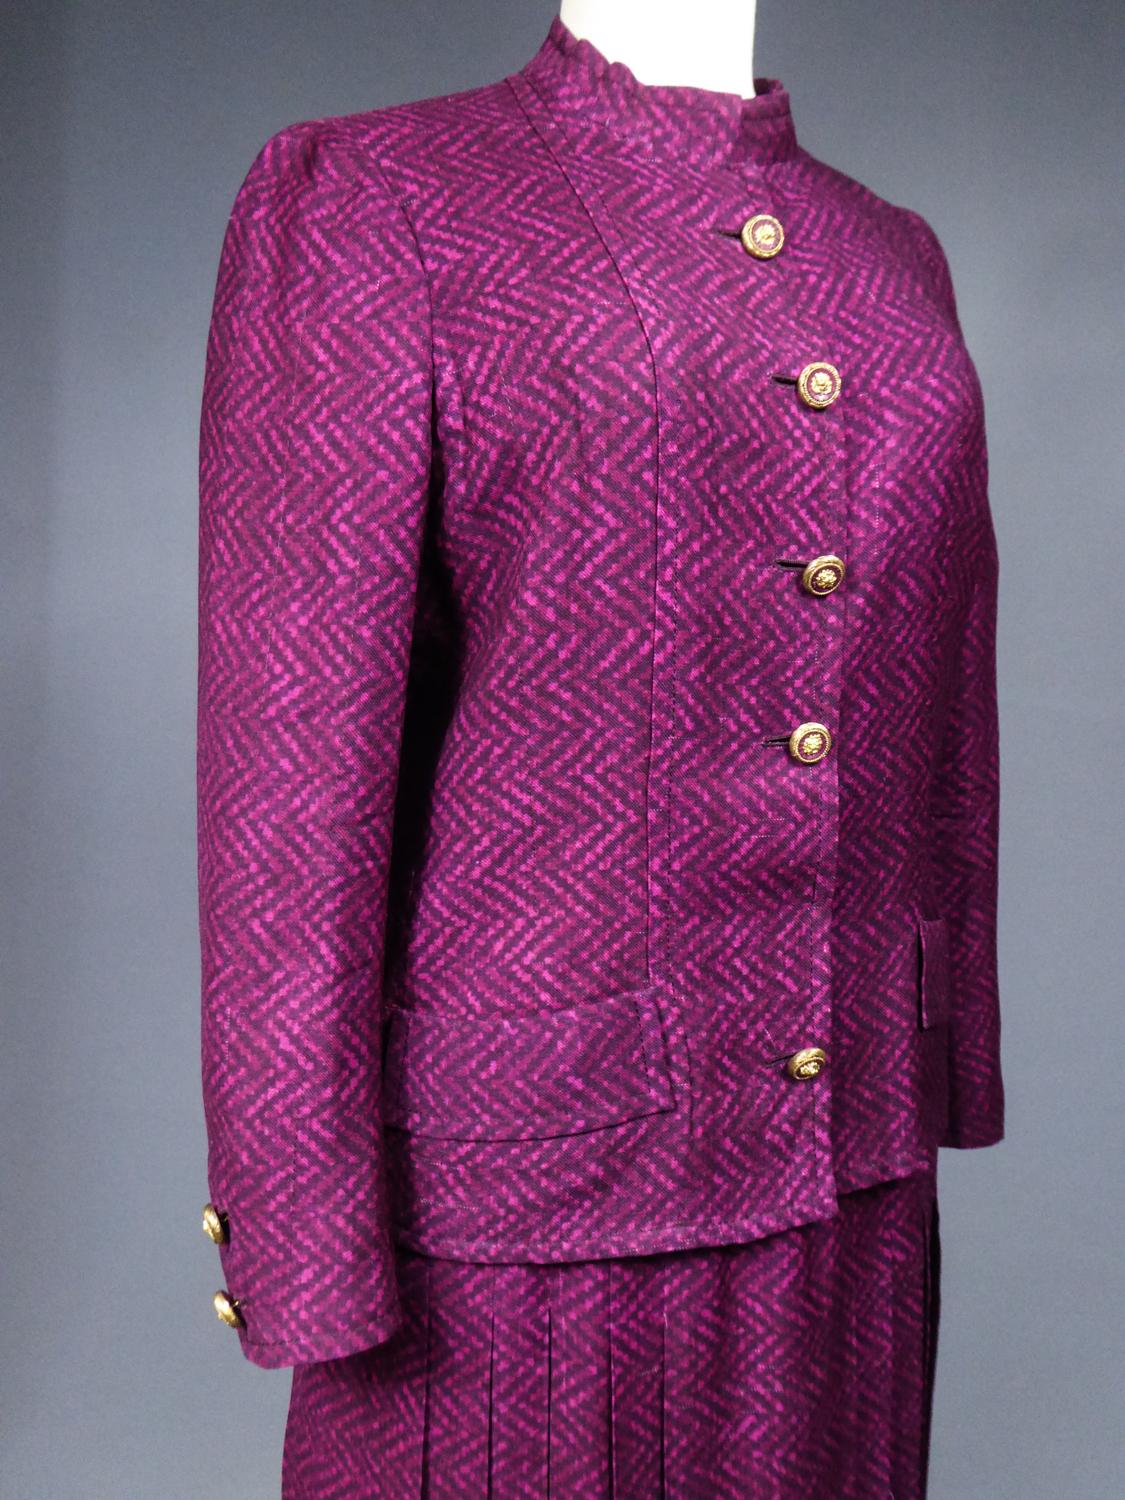 A French Couture Silk Chanel Skirt and Jacket Suit number 60423 & 60422 C. 1980 For Sale 3